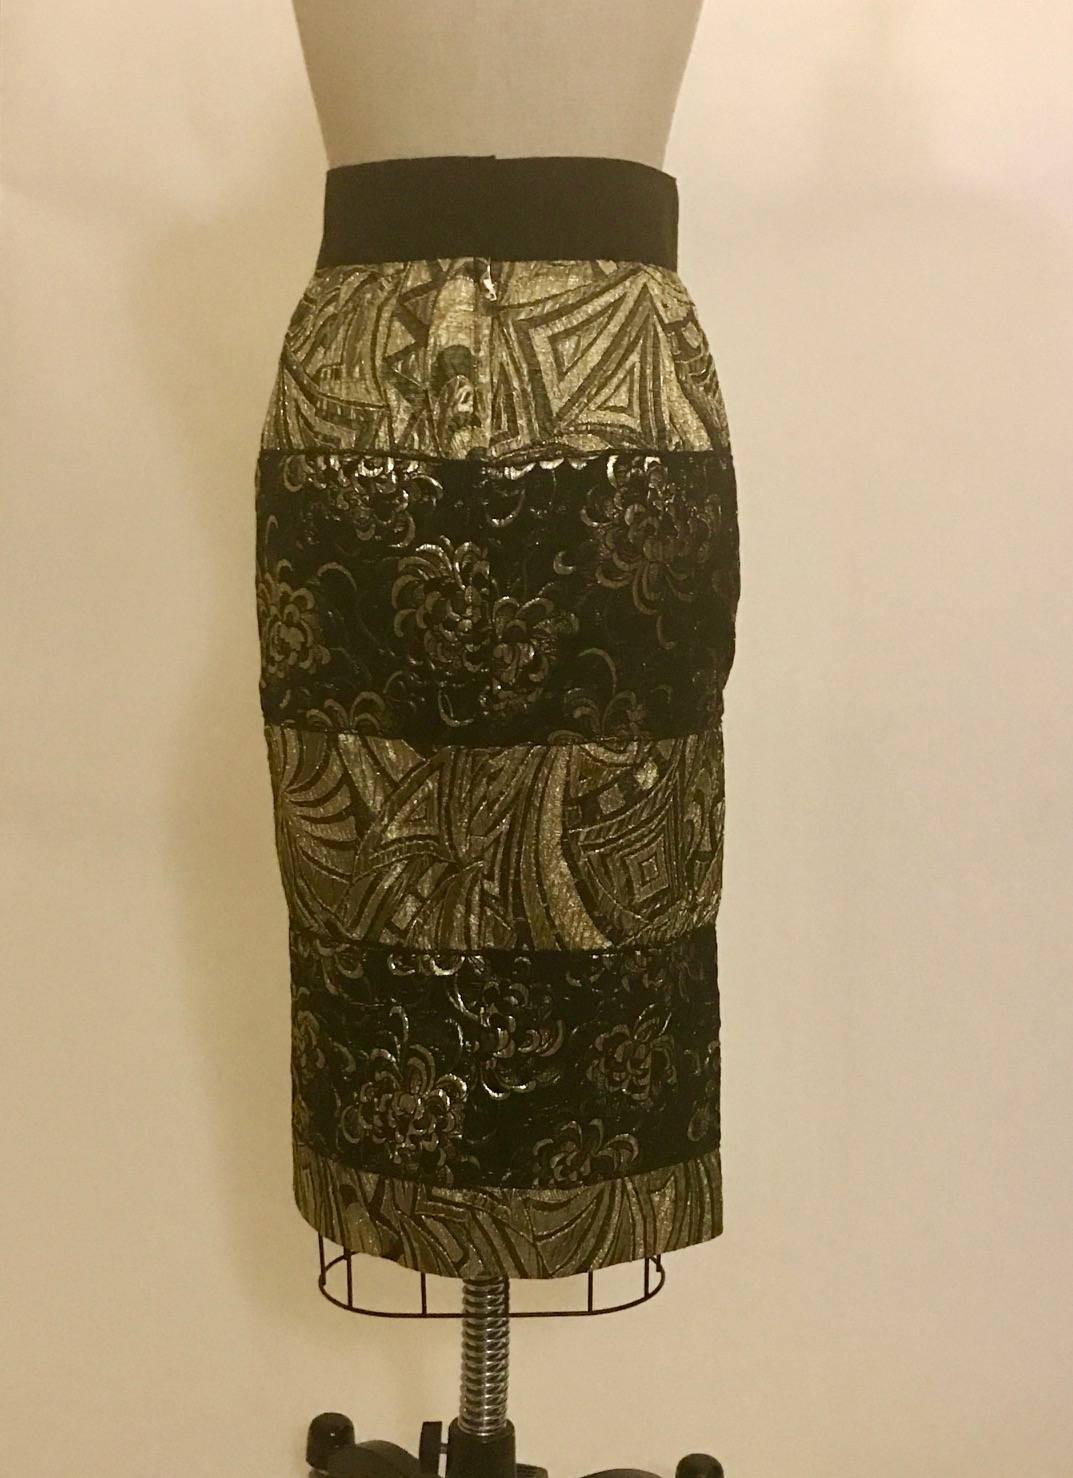 Dolce & Gabbana metallic gold and black jacquard skirt with alternating panels of floral and geometric patterns. Grosgrain waistband. Back slit at center. Closes at back with a zip and two snaps.

74% polyester, 19% nylon, 7% acrylic.
Fully